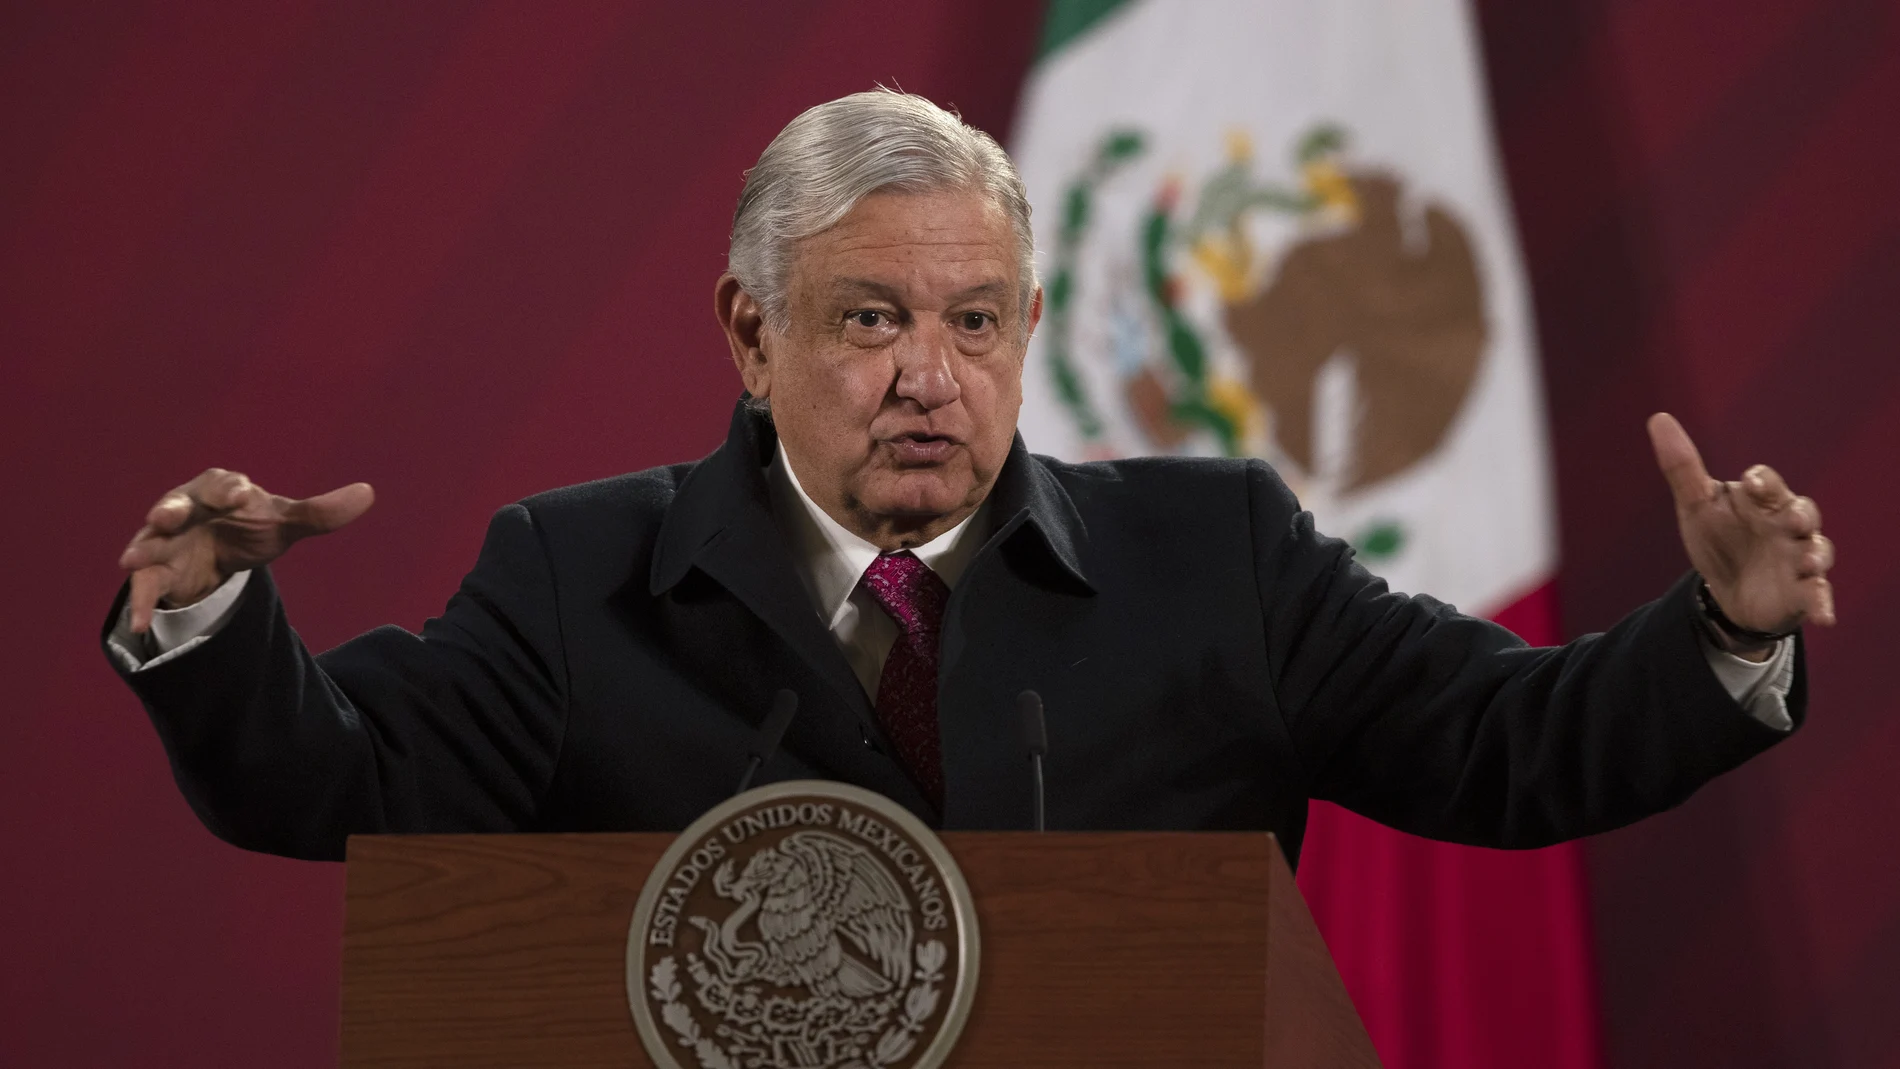 FILE - In this Dec. 18, 2020 file photo, Mexican President Andres Manuel Lopez Obrador gives his daily, morning news conference at the presidential palace, Palacio Nacional, in Mexico City. Mexico President AndrÃ©s Manuel LÃ³pez Obrador says he has tested positive for COVID-19 and is under medical treatment, Sunday, Jan. 24, 2021. (AP Photo/Marco Ugarte, File)